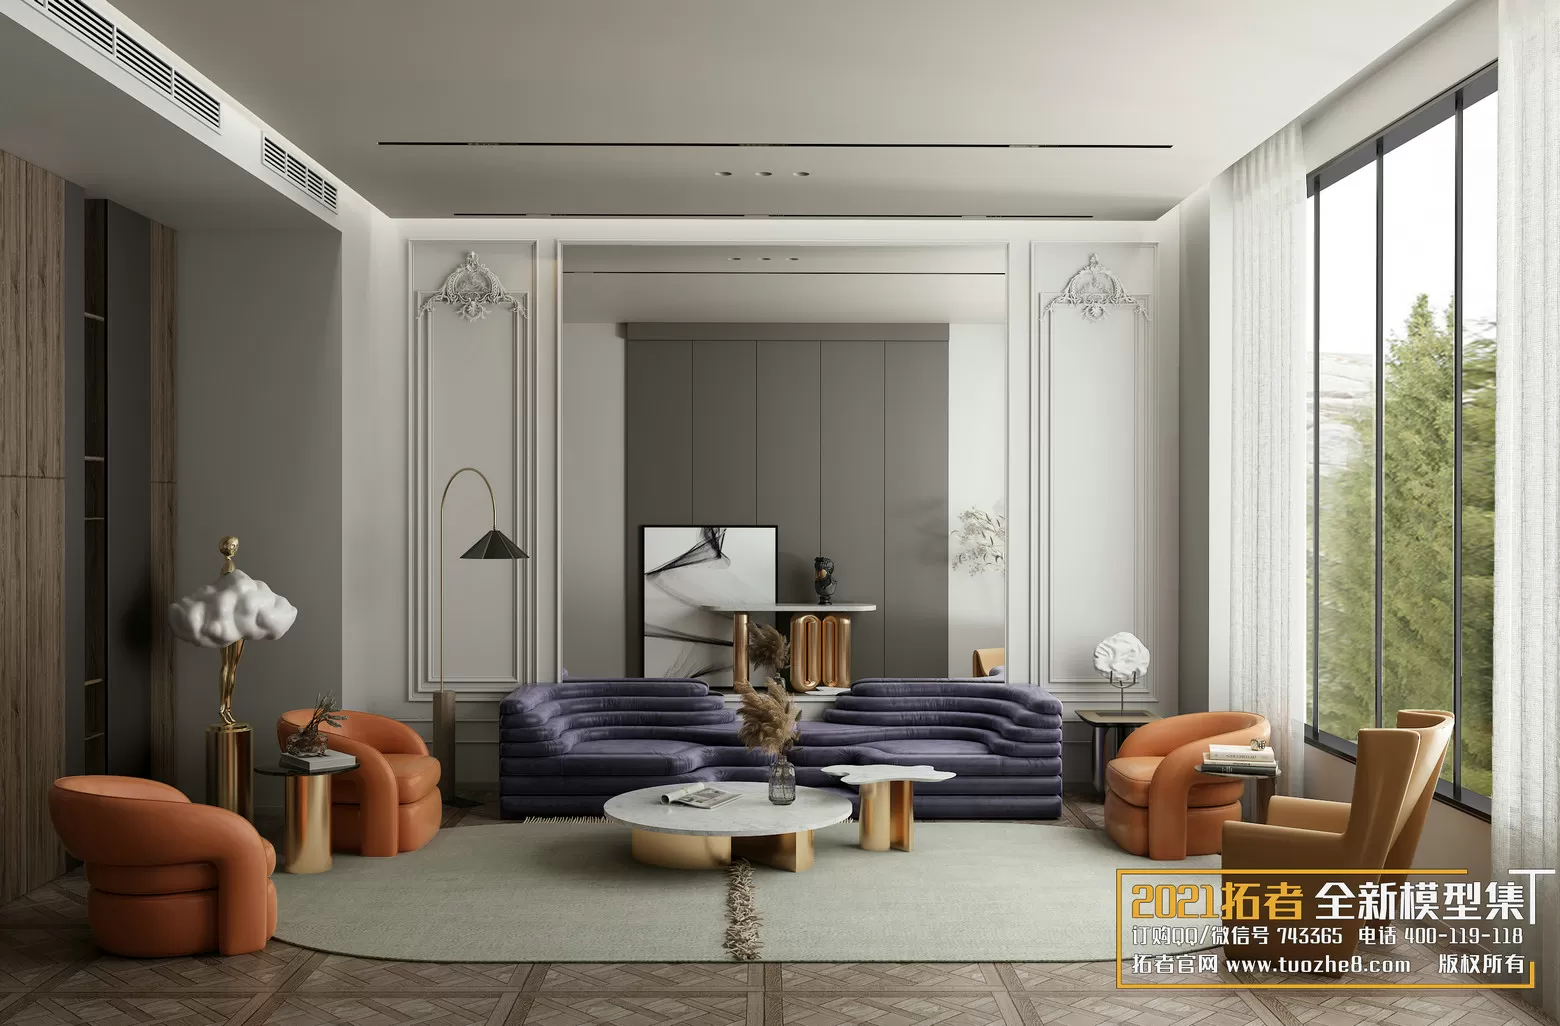 EXTENSION 2021 – 1. LIVING ROOM – 1.3. MIX STYLES – 42vr – VRAY